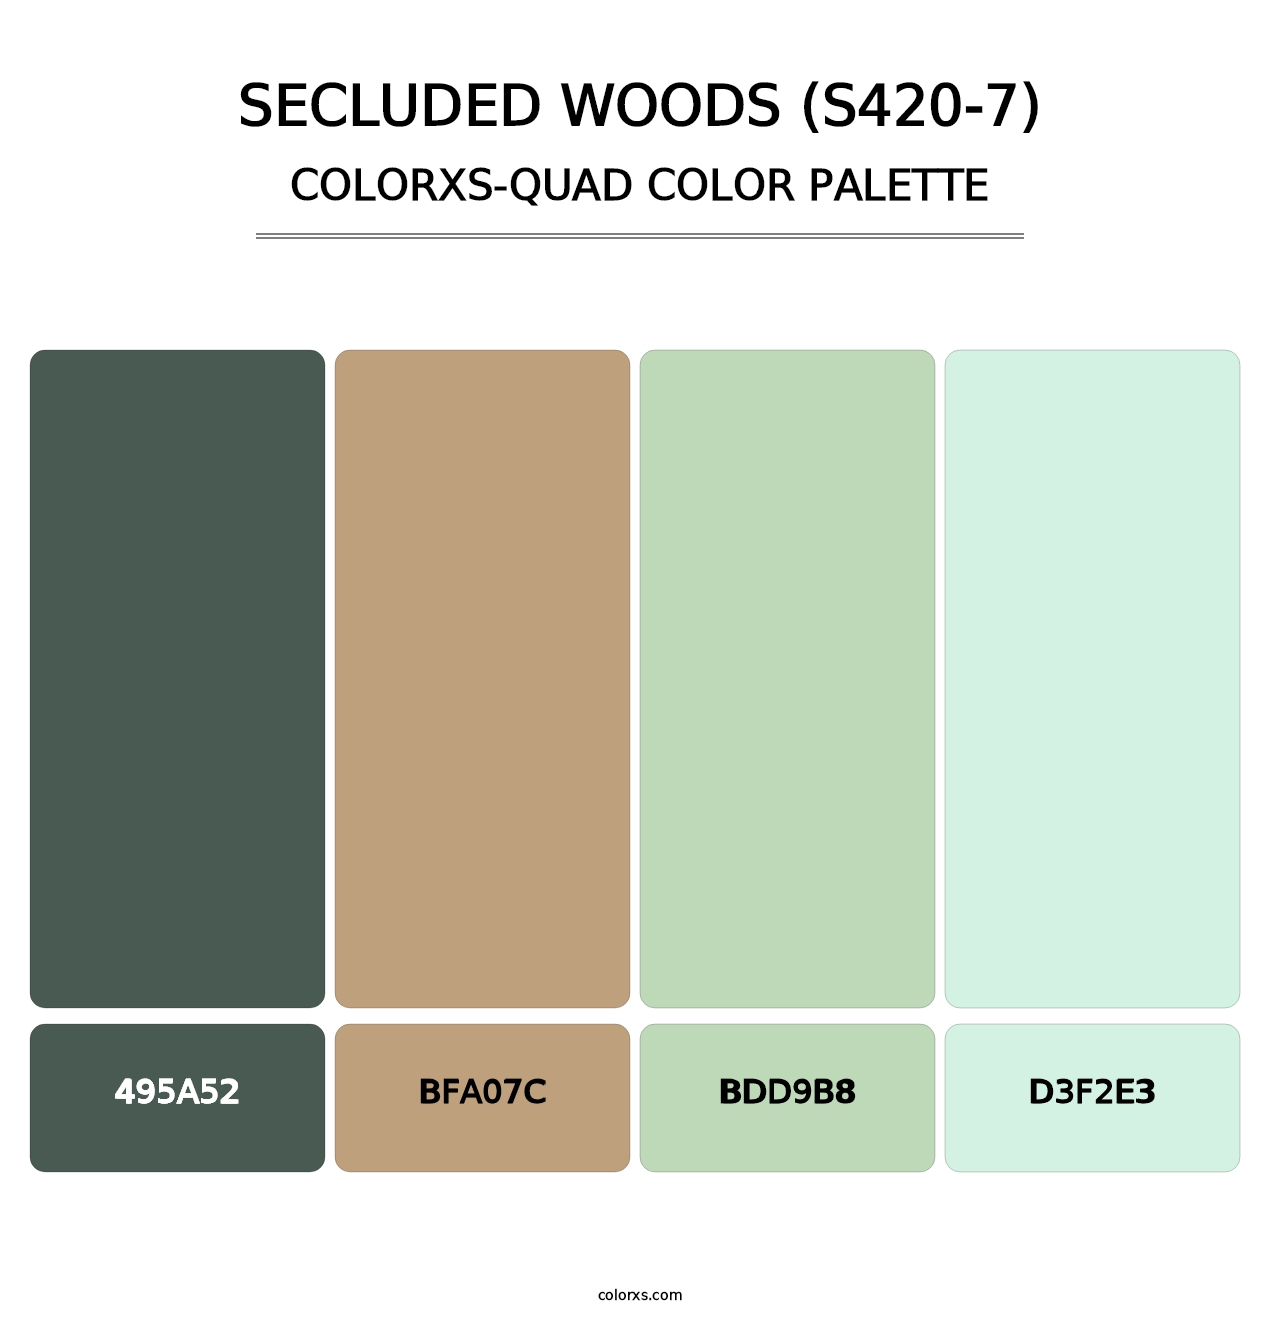 Secluded Woods (S420-7) - Colorxs Quad Palette